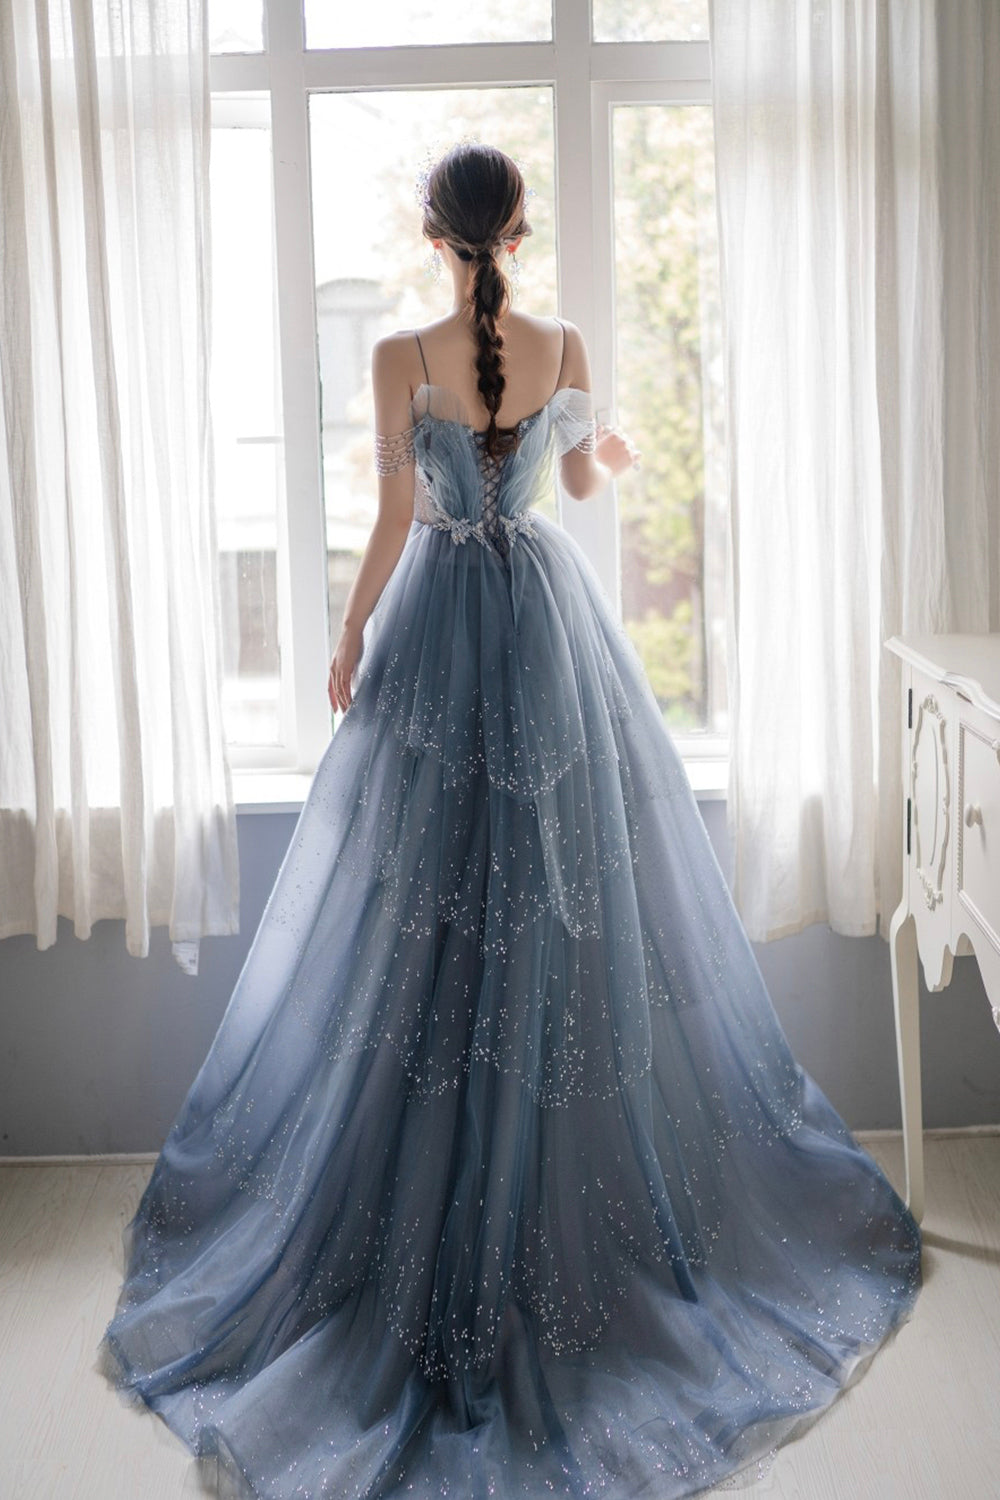 Blue Tulle Beaded Long A-Line Prom Dress, Blue Formal Evening Gown